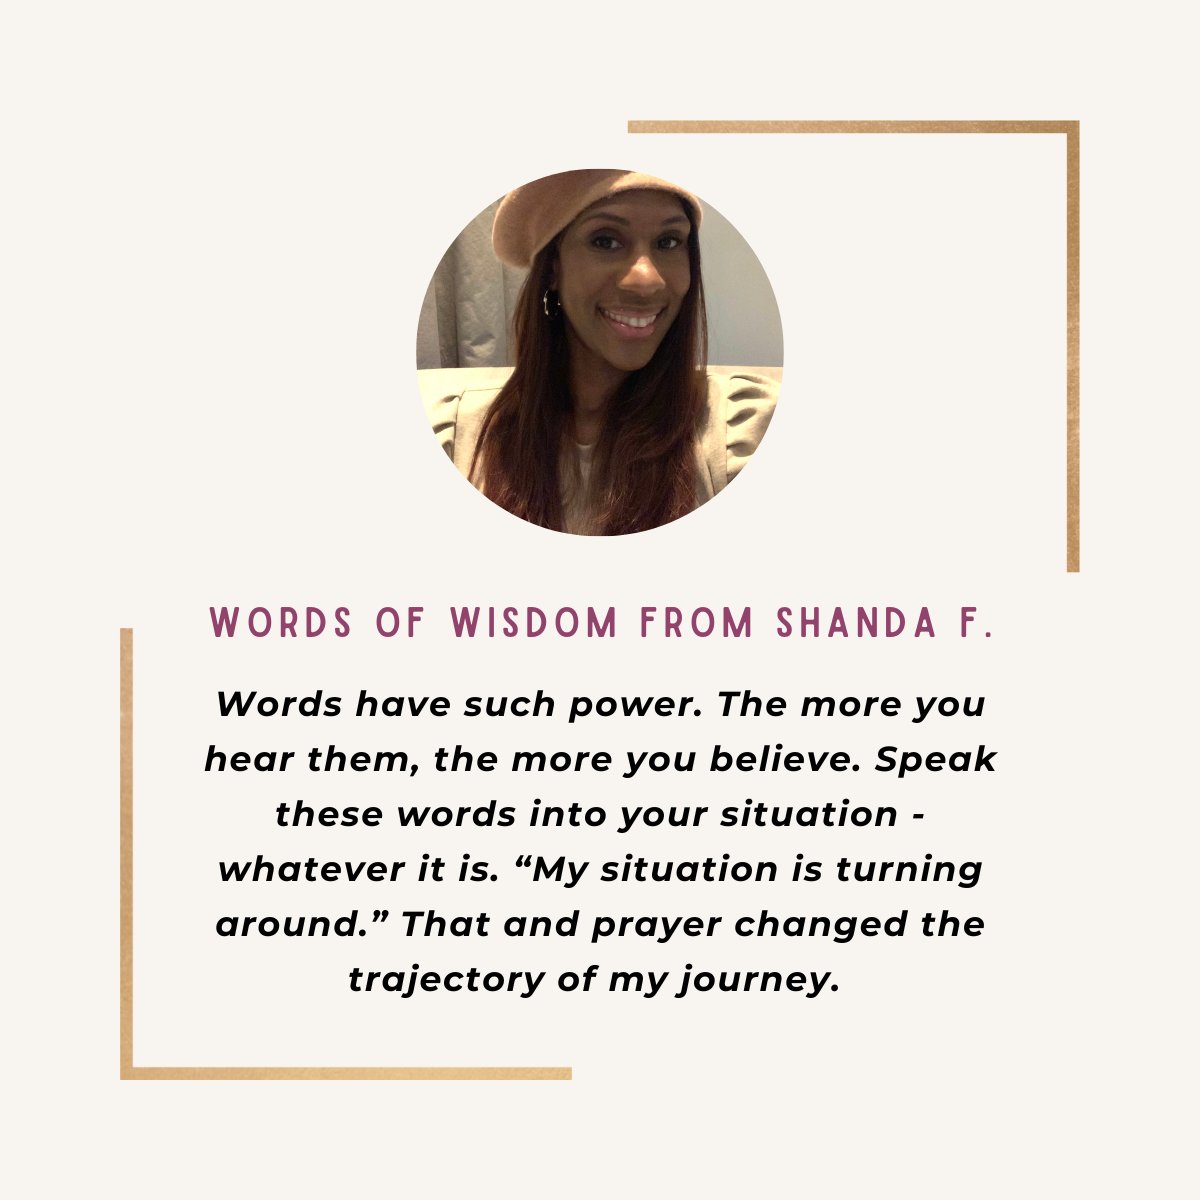 We are happy to share some words of wisdom from our wonderful Shanda F. If you are looking for support during your #EndometrialCancer journey, join us at our Survivors' Sanctuary. Learn more: ecanawomen.org/community/sanc…